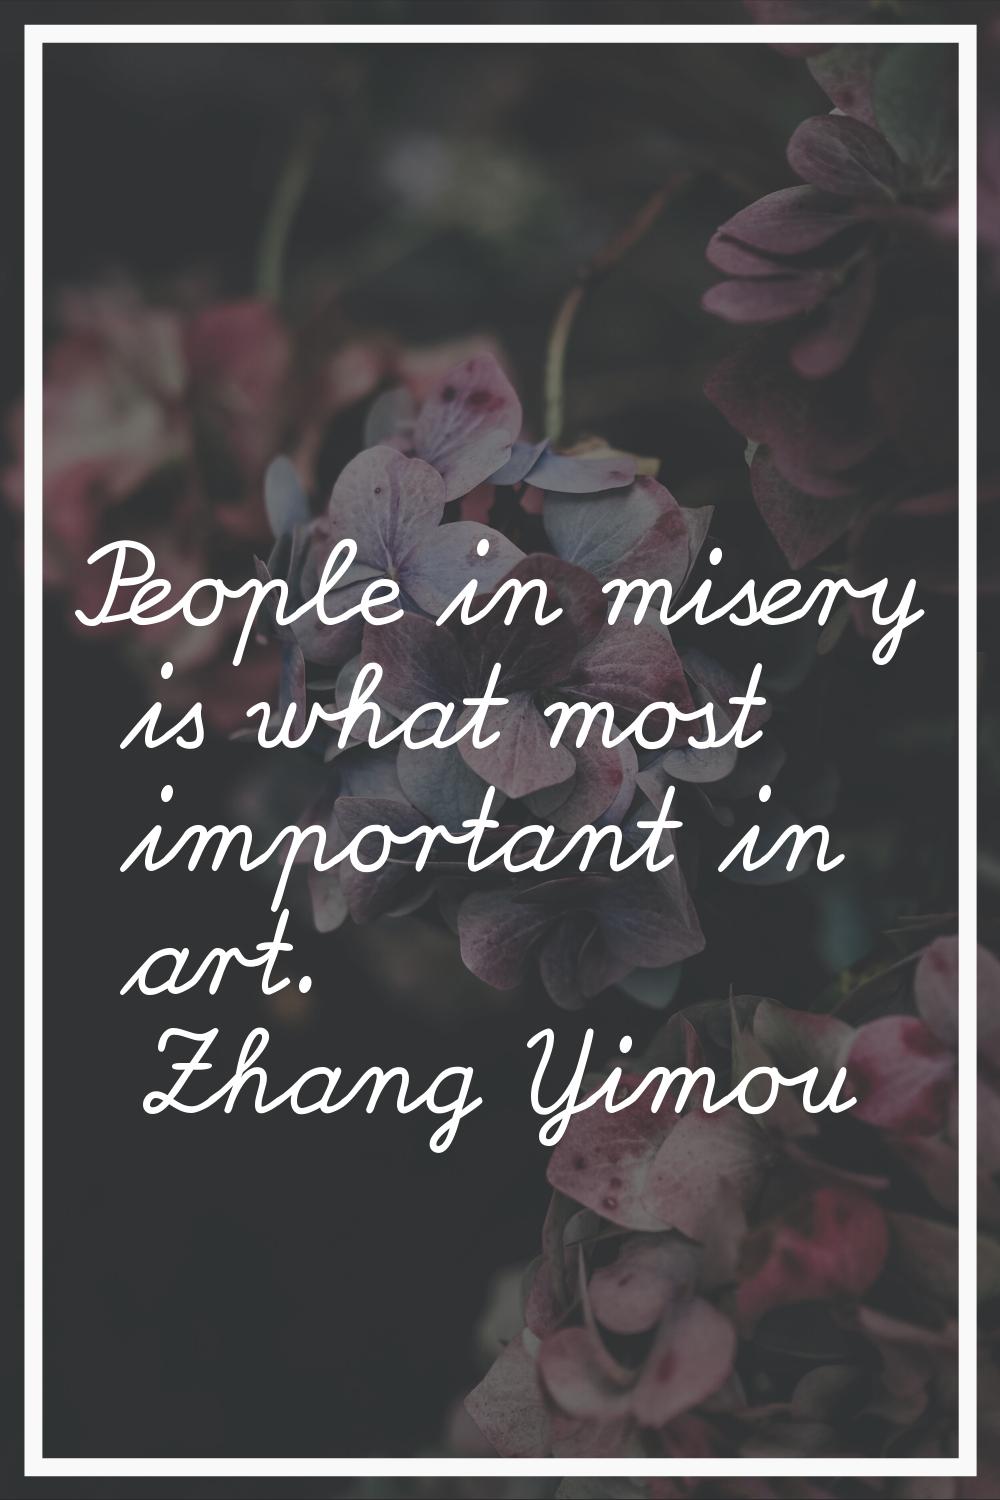 People in misery is what most important in art.